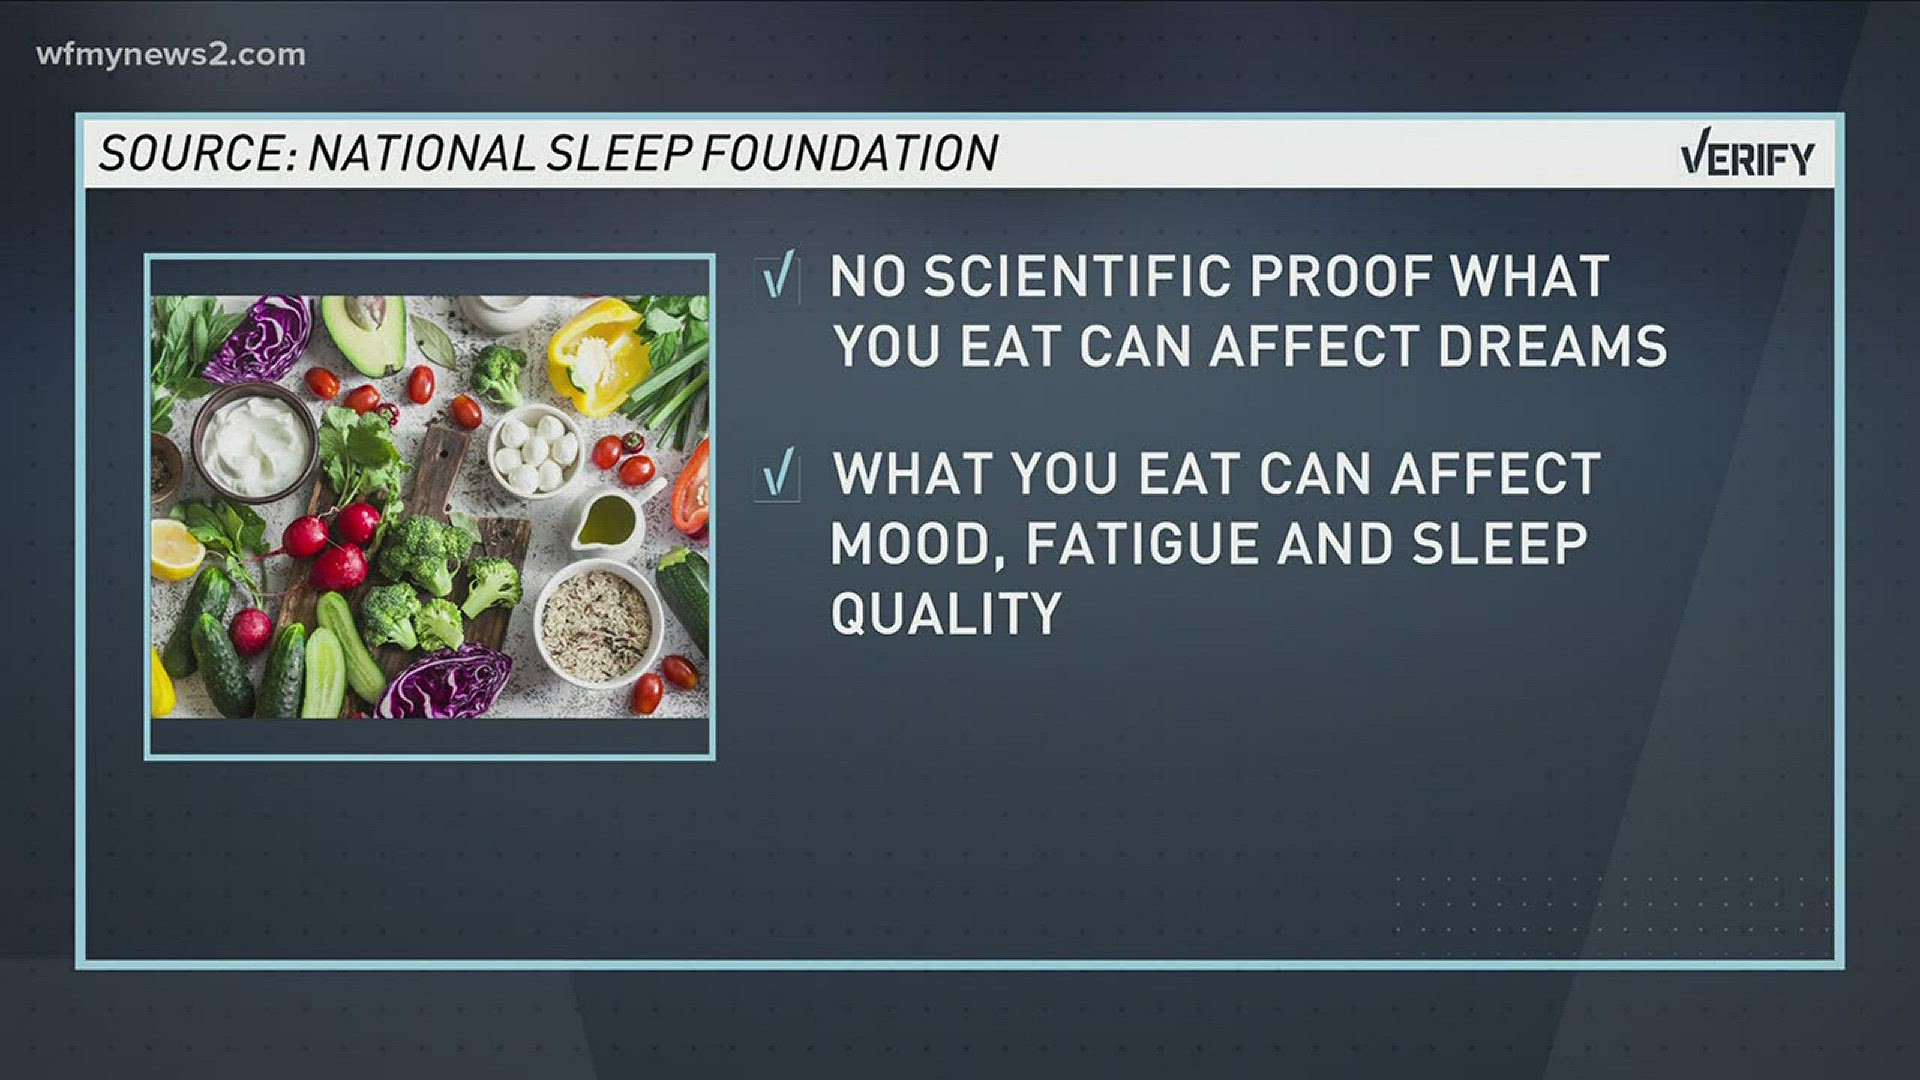 VERIFY: Does What You Eat Affect Your Sleep?